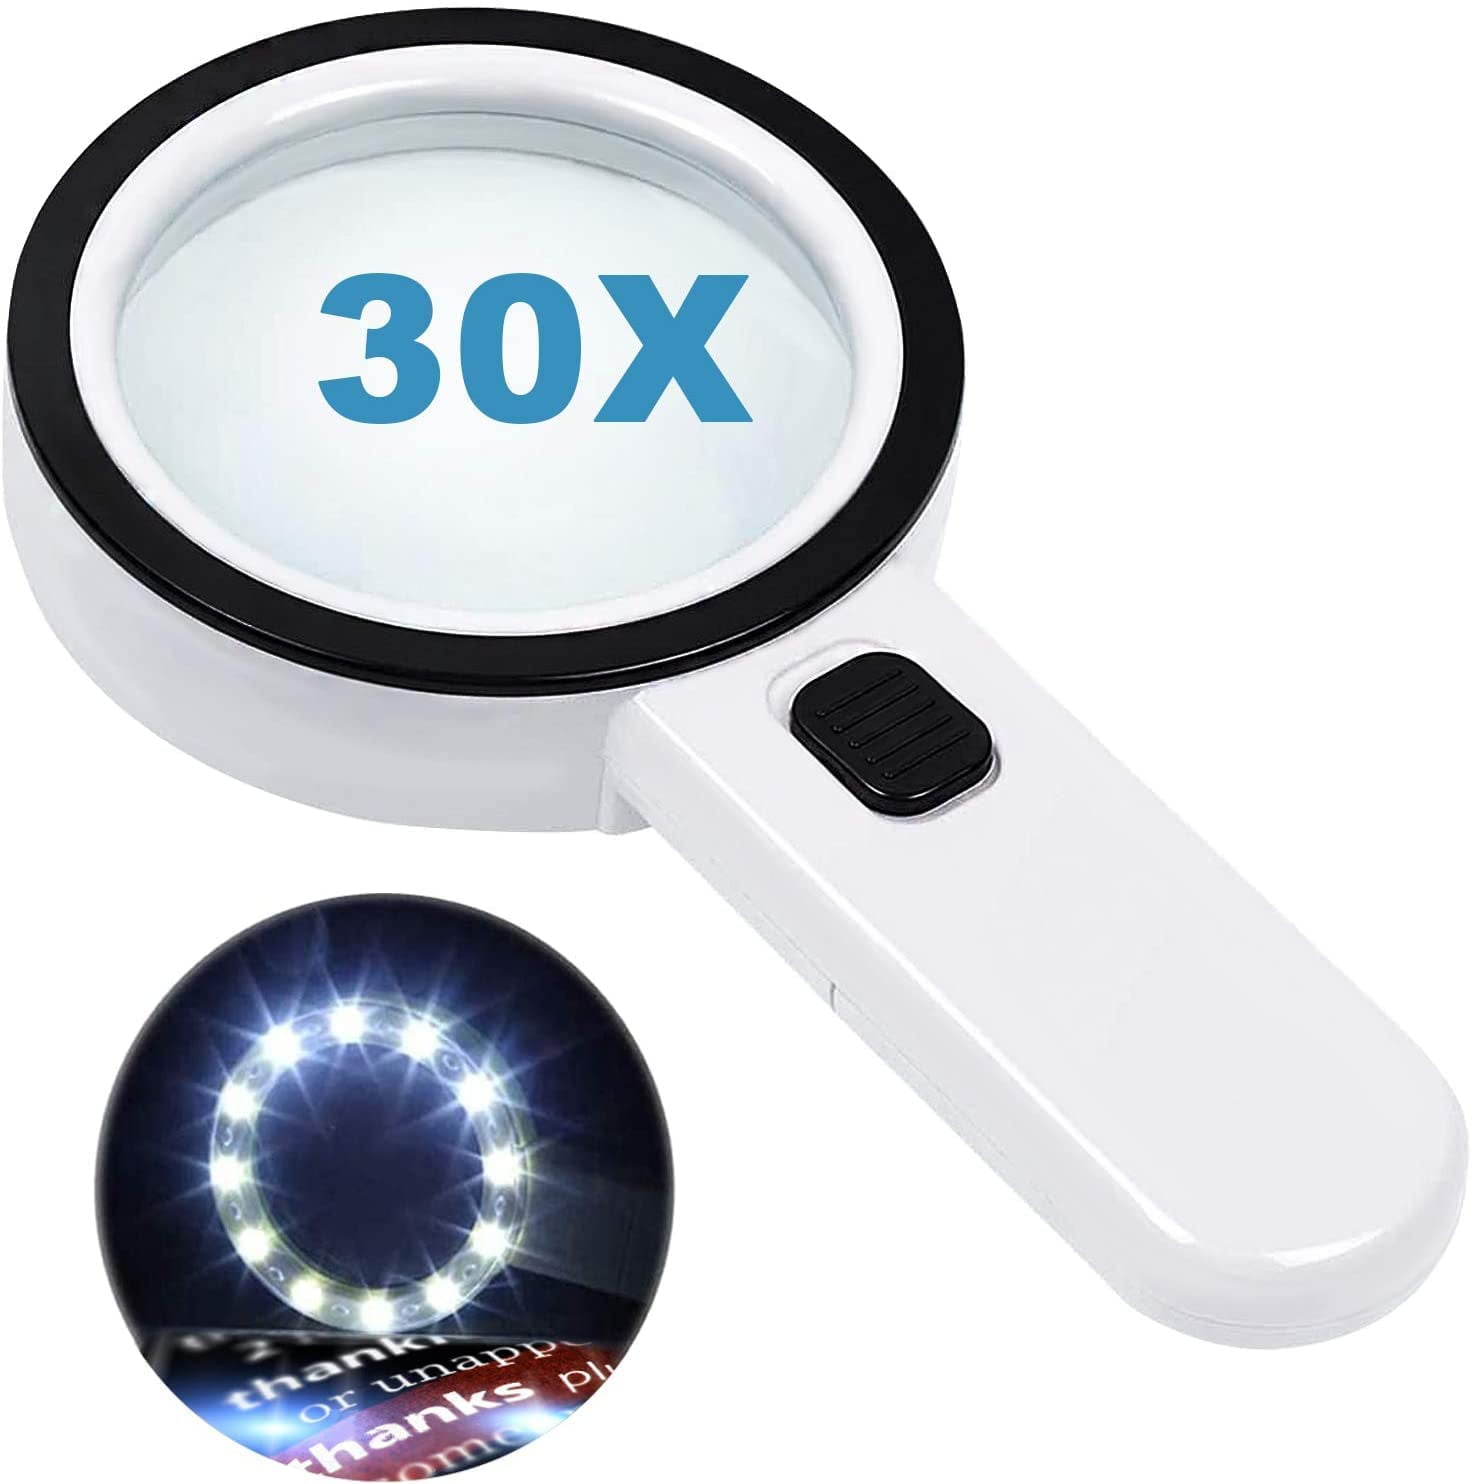 100x magnifying glass For Flawless Viewing And Reading 